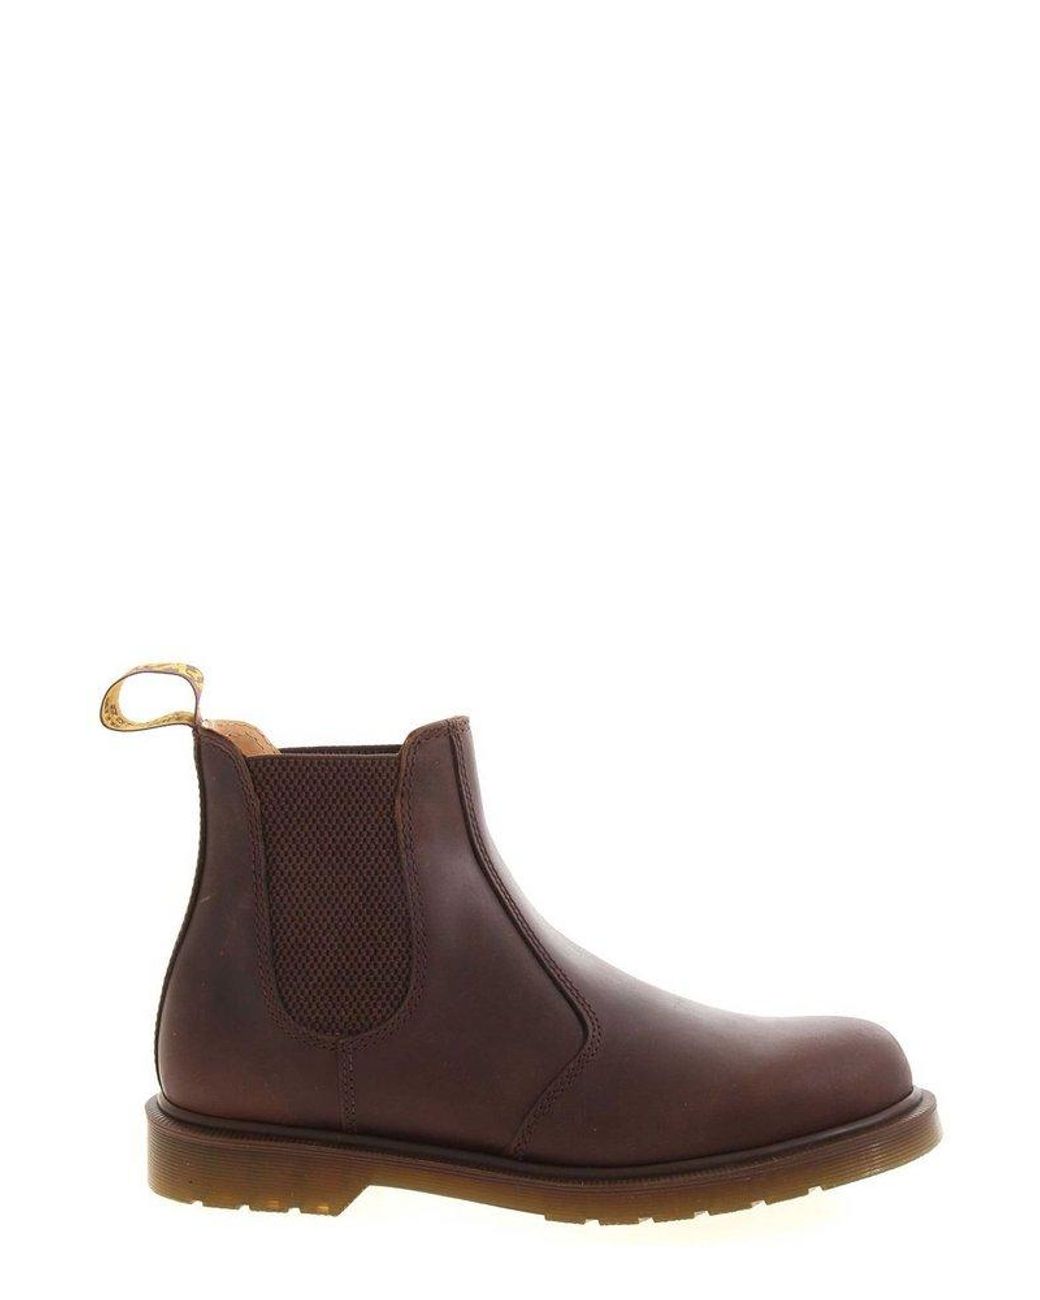 Dr. Martens 2976 Crazy Horse Ankle Boots in Brown | Lyst